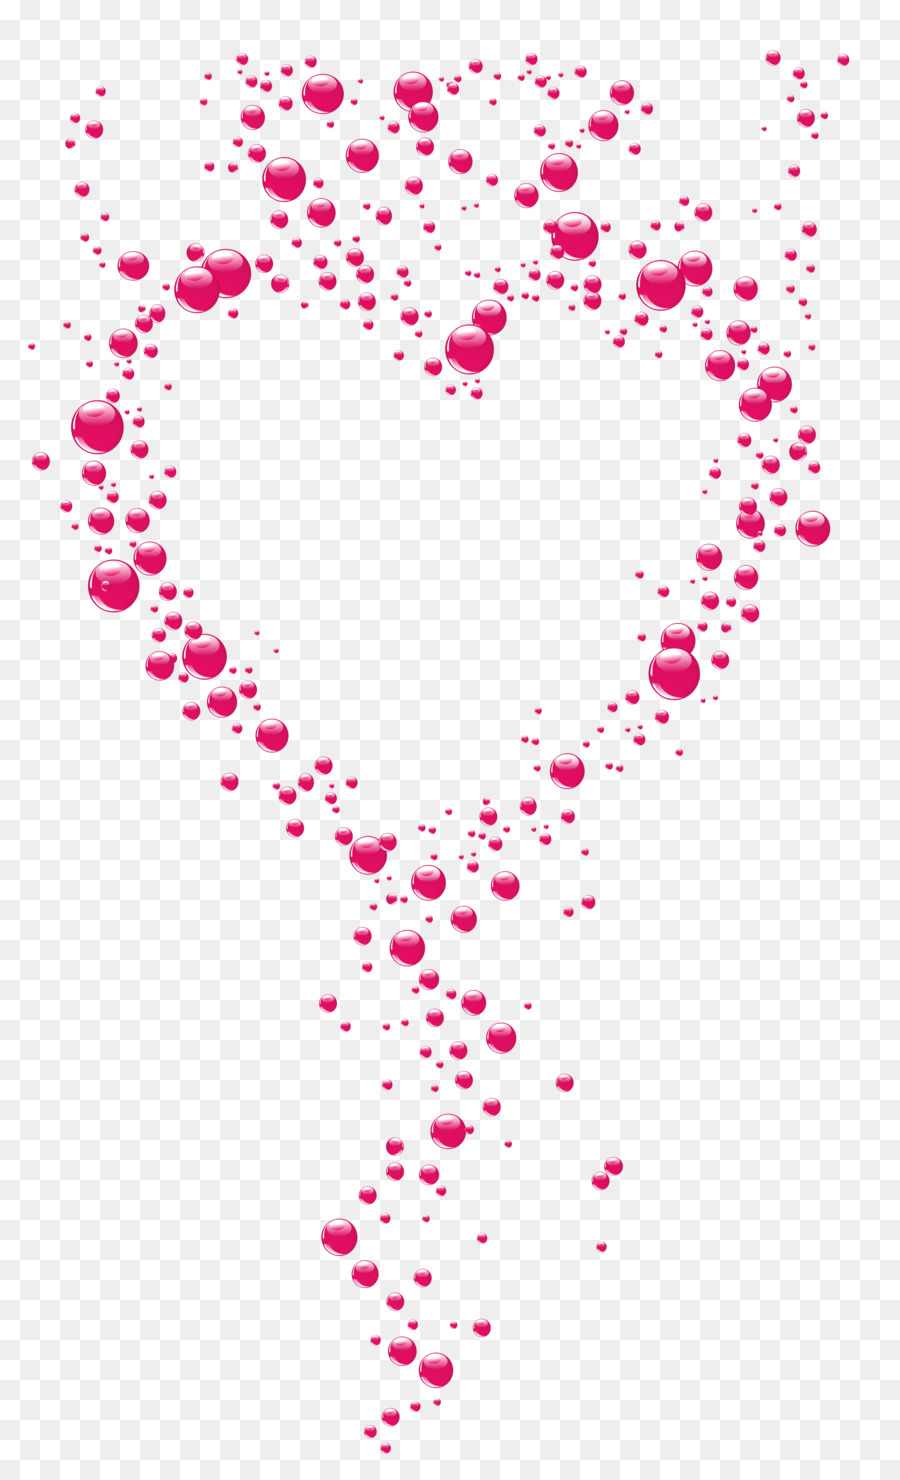 Heart Bubble Clip art - PINK HEARTS png download - 2000*3286 - Free Transparent  png Download.